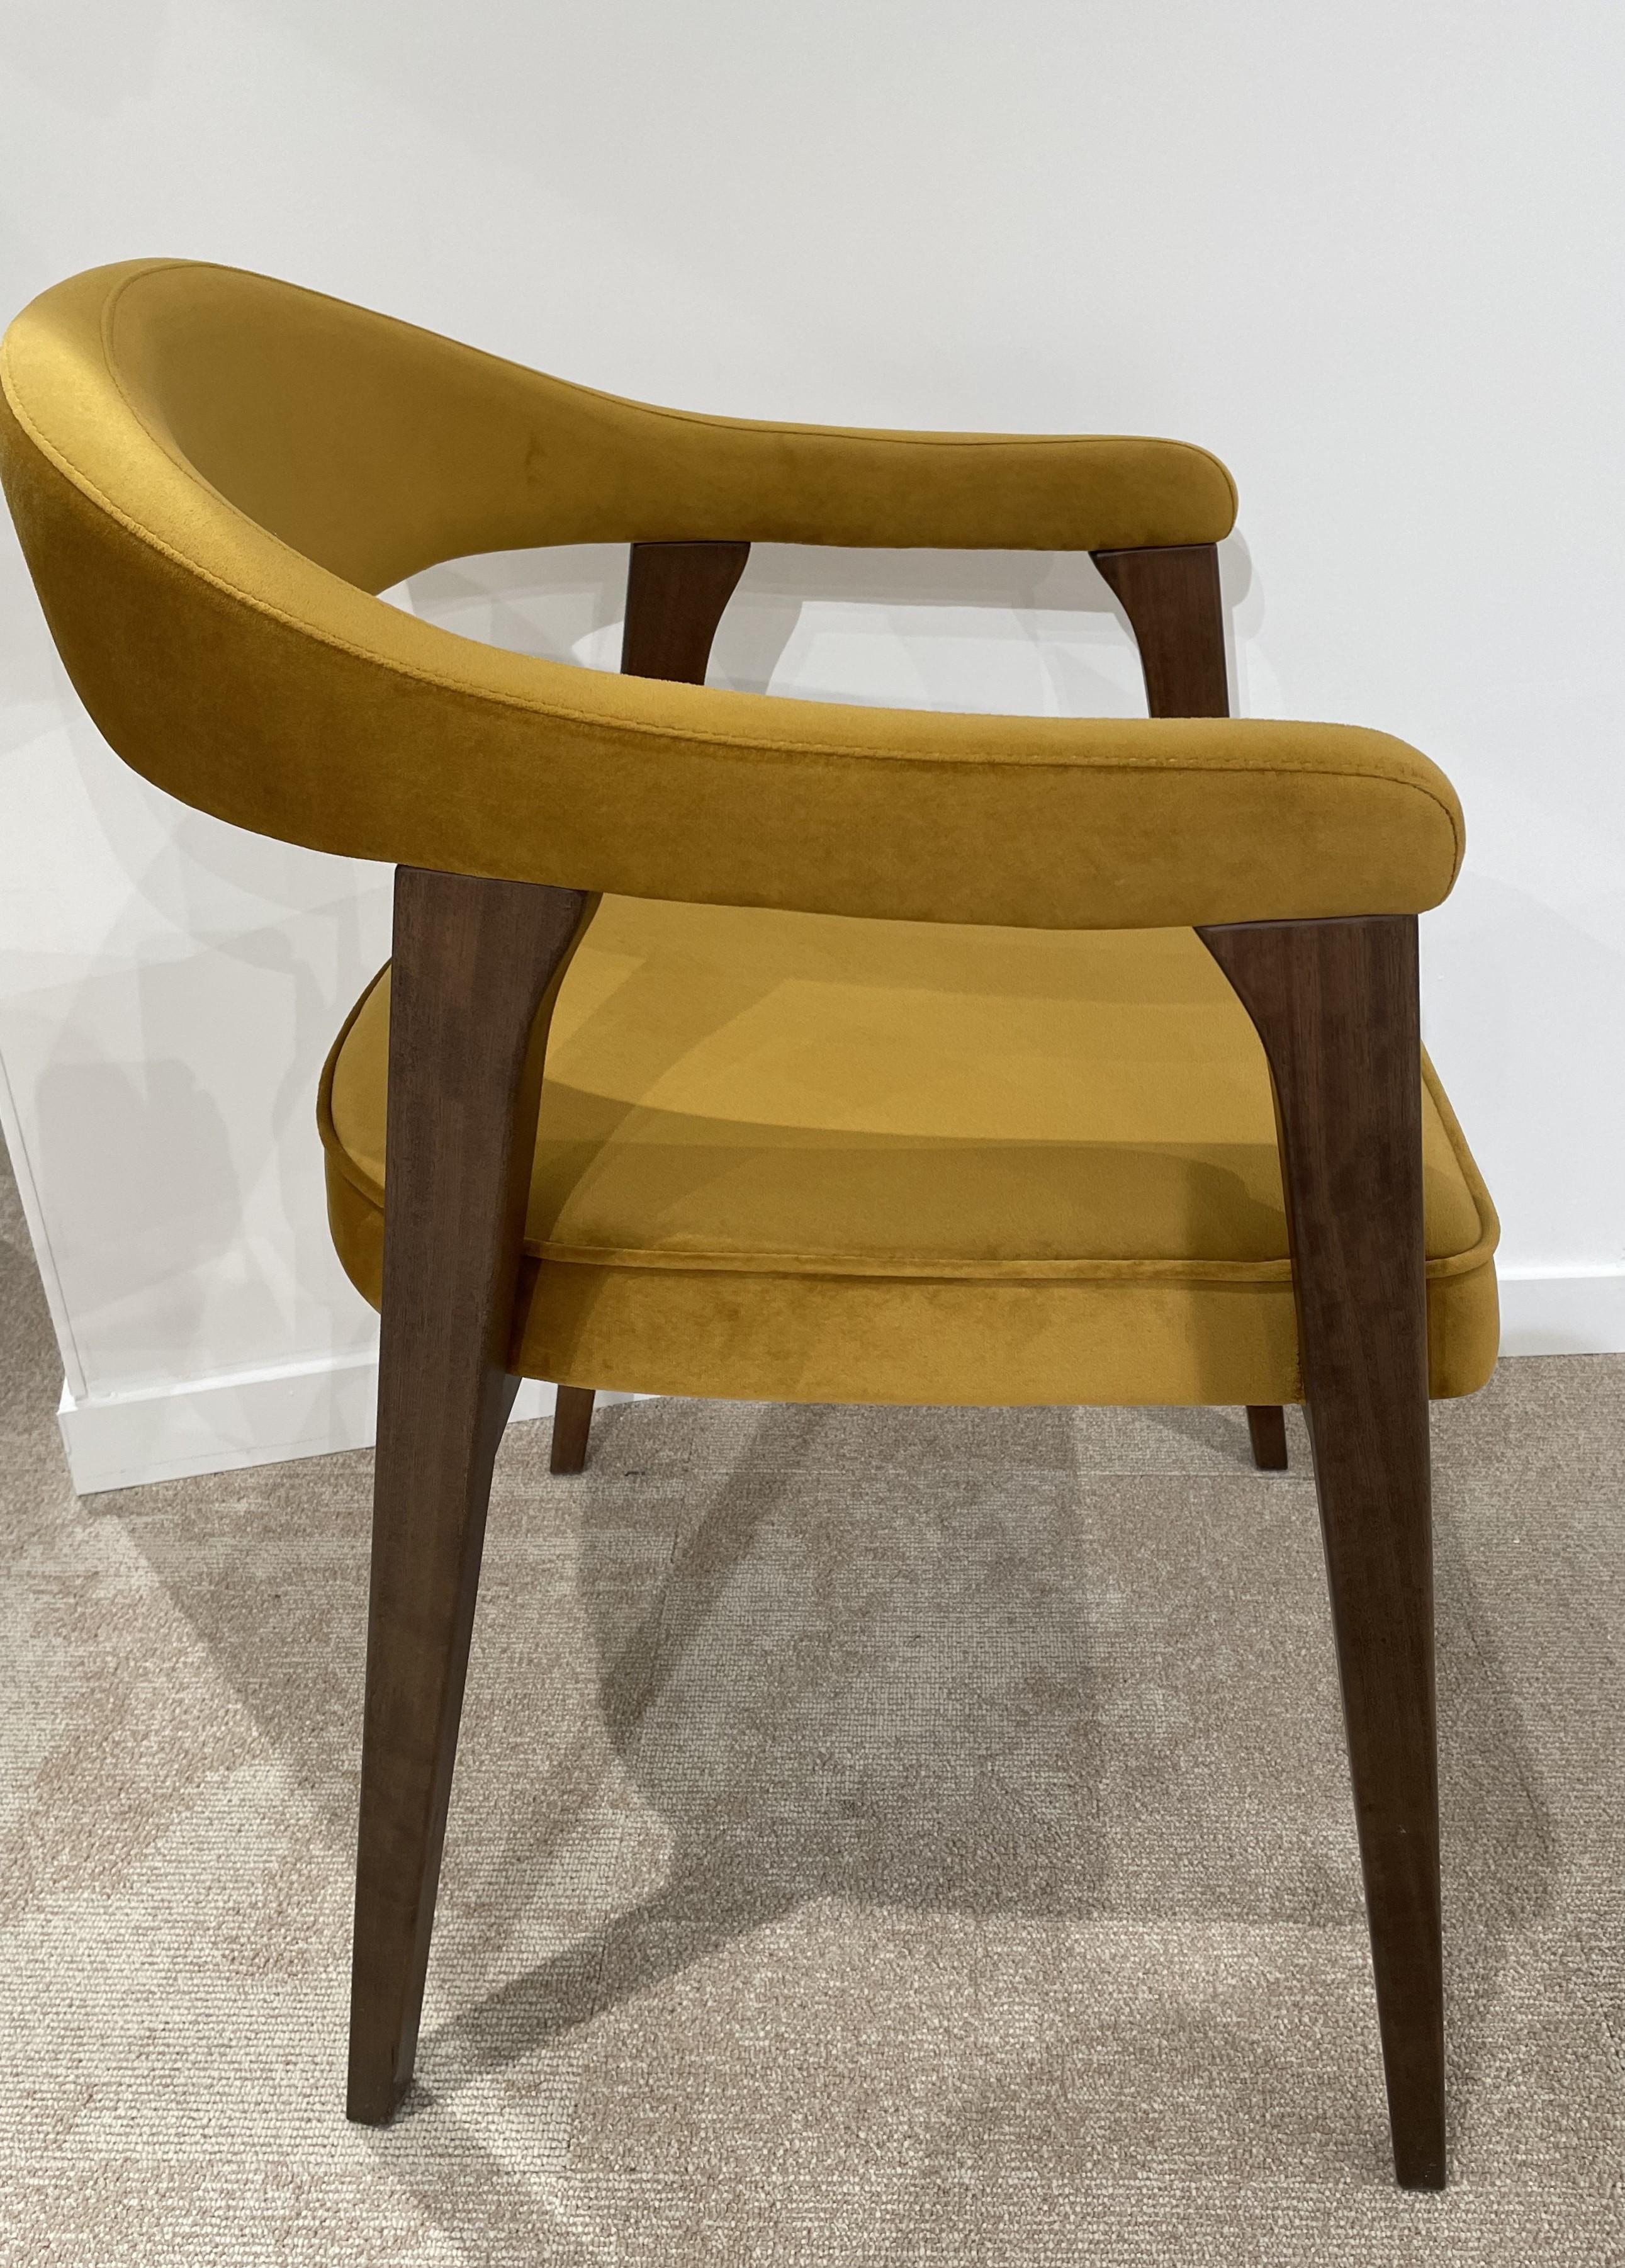 1960s Danish Design and Scandinavian Style Wooden and Velvet Fabric Chair For Sale 3